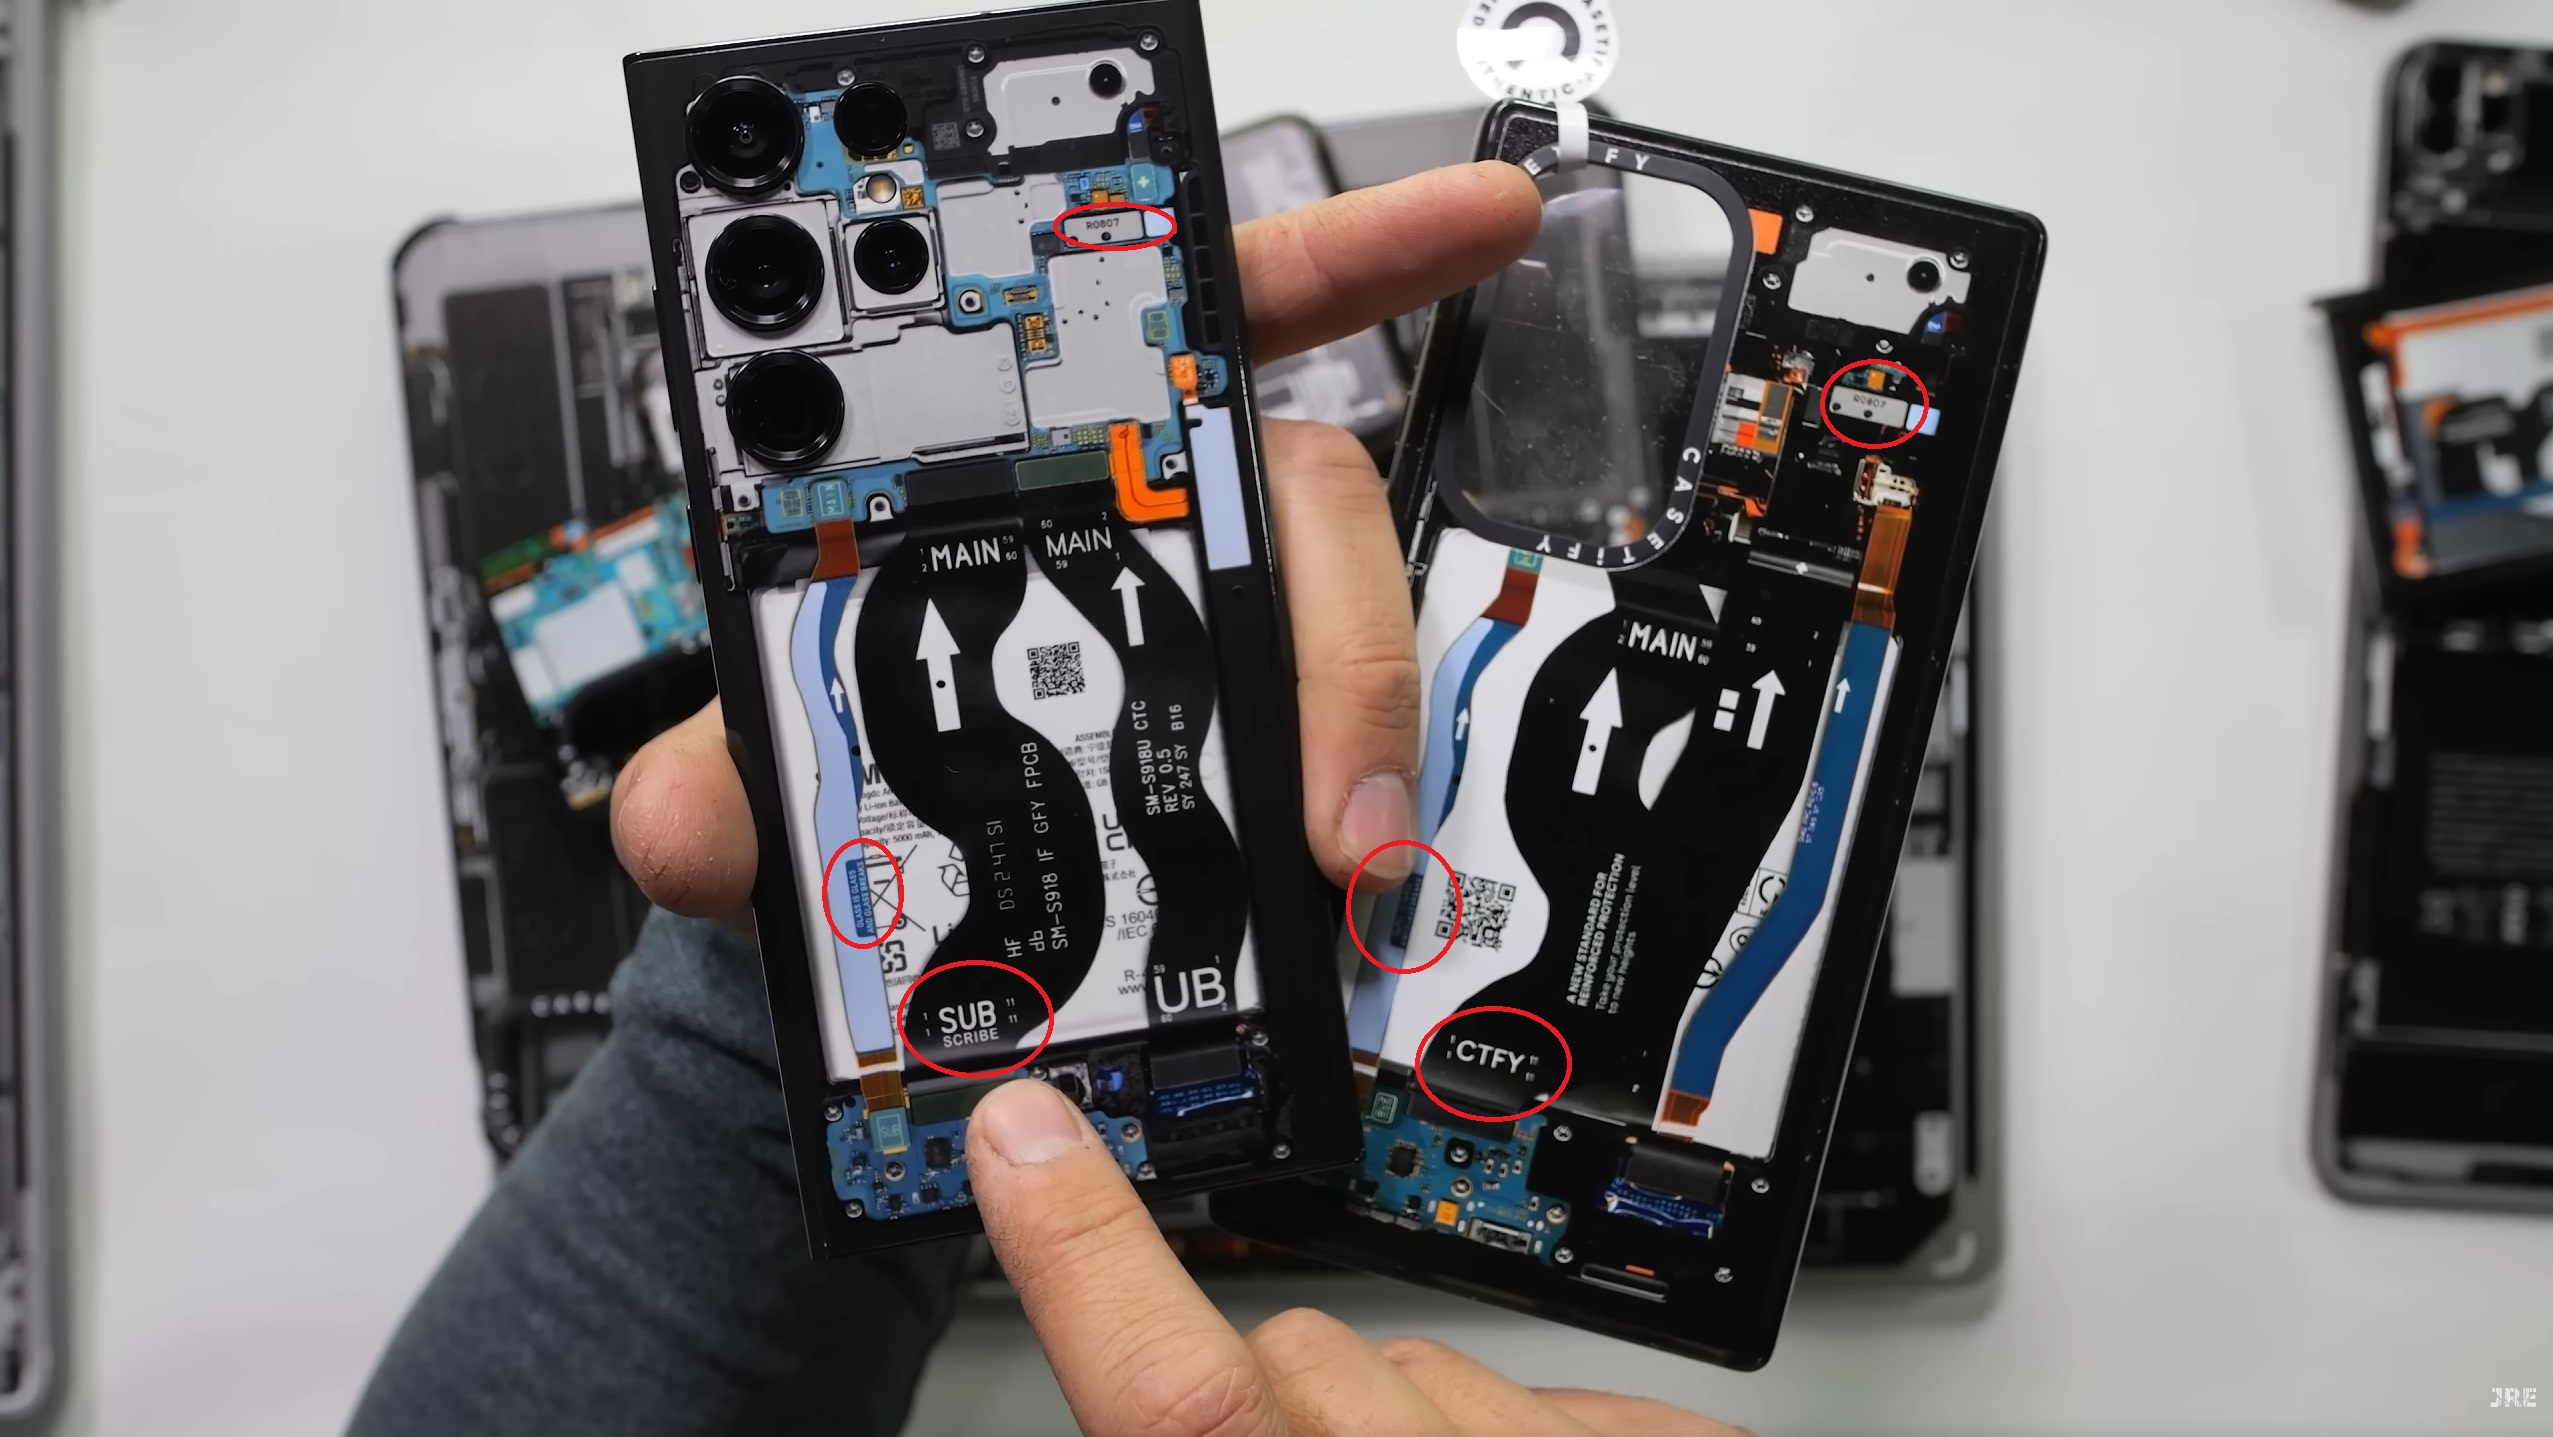 JerryRigEverything and dbrand Sue Casetify for Plagiarizing Tear-Down Skins